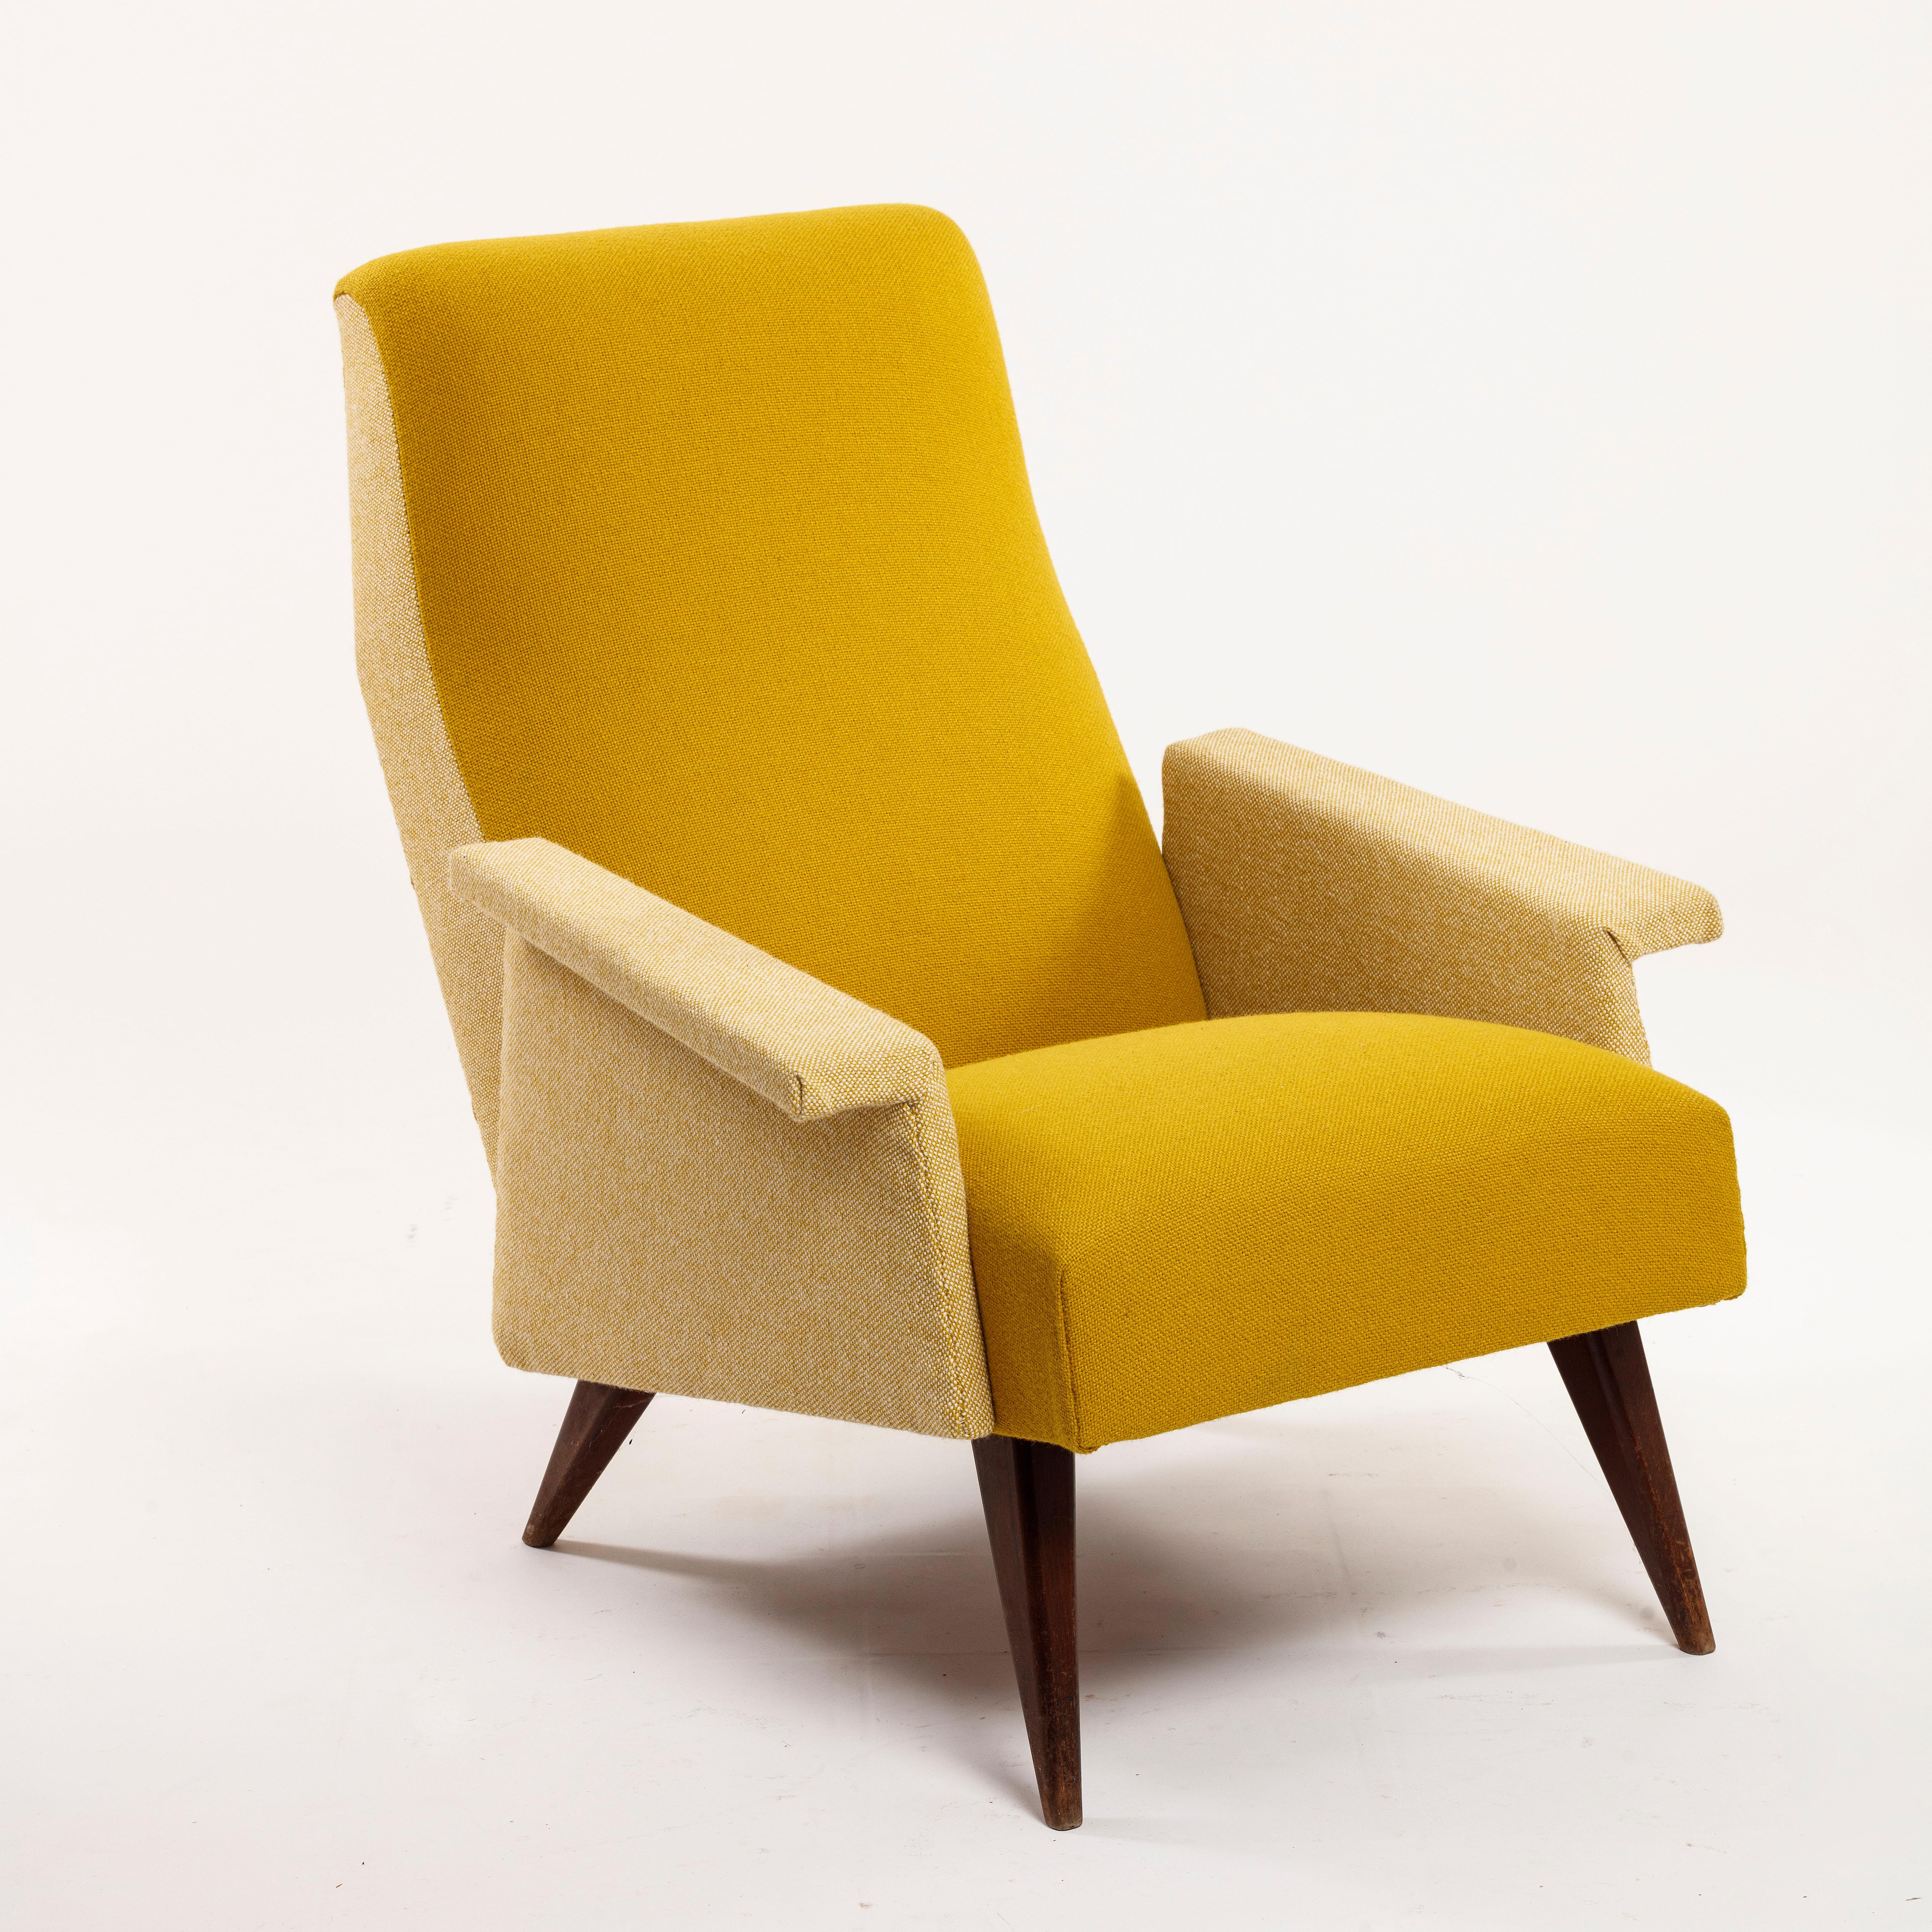 stunning mid century modern style armchair upholstered in yellow Kvadrat fabric, the oak parts have been revised and the foam changed. 
it's like new with 60's italian style.


